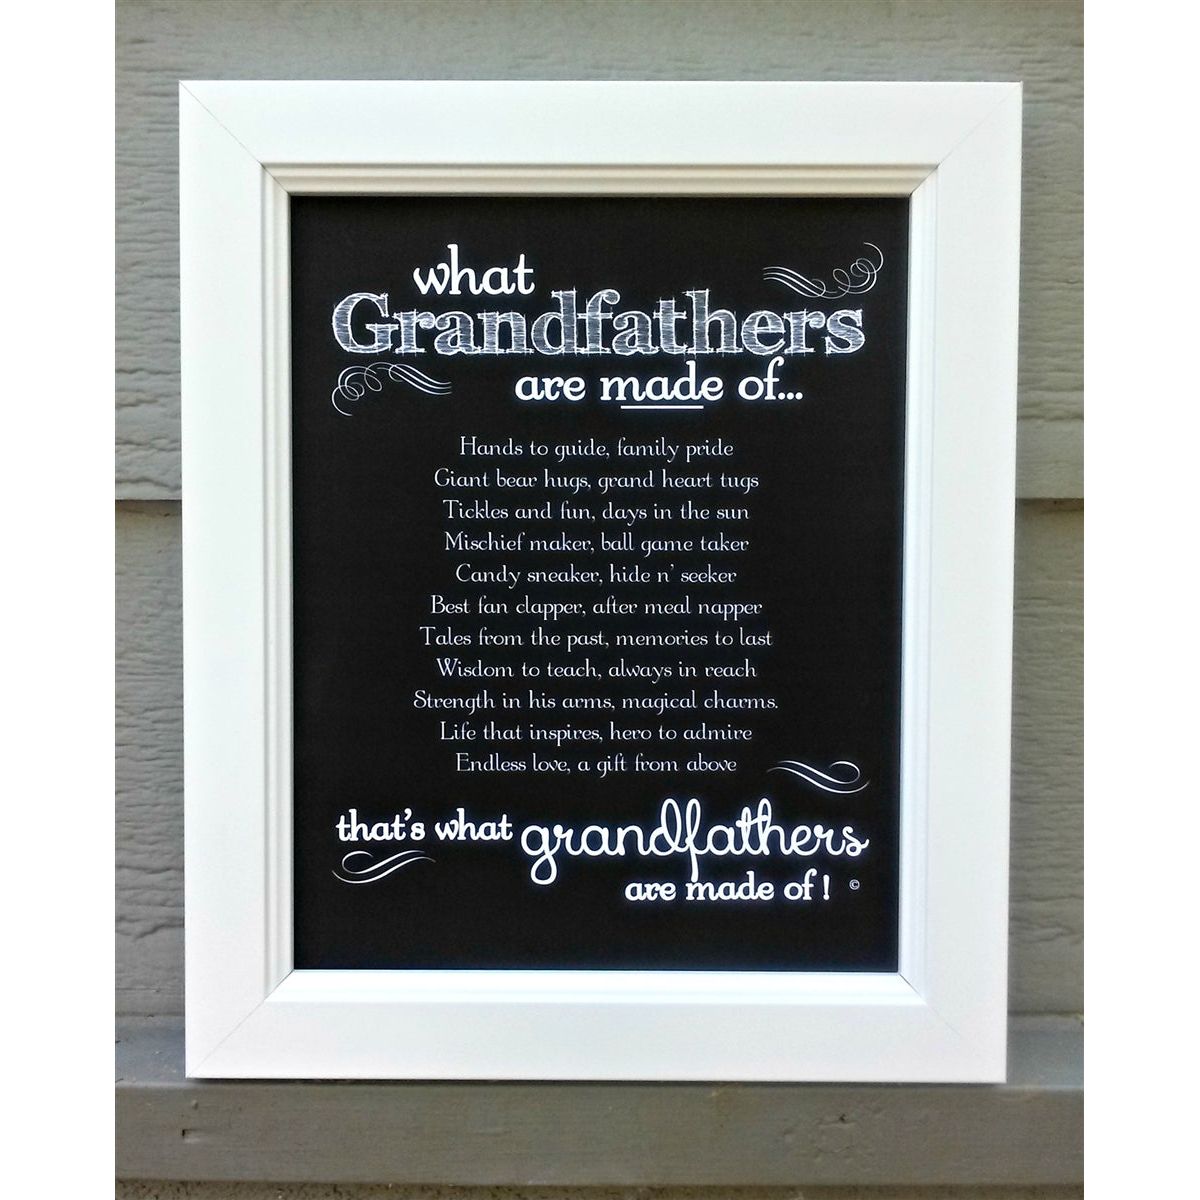 Grandfather Frame: Grandfathers Made of Poem